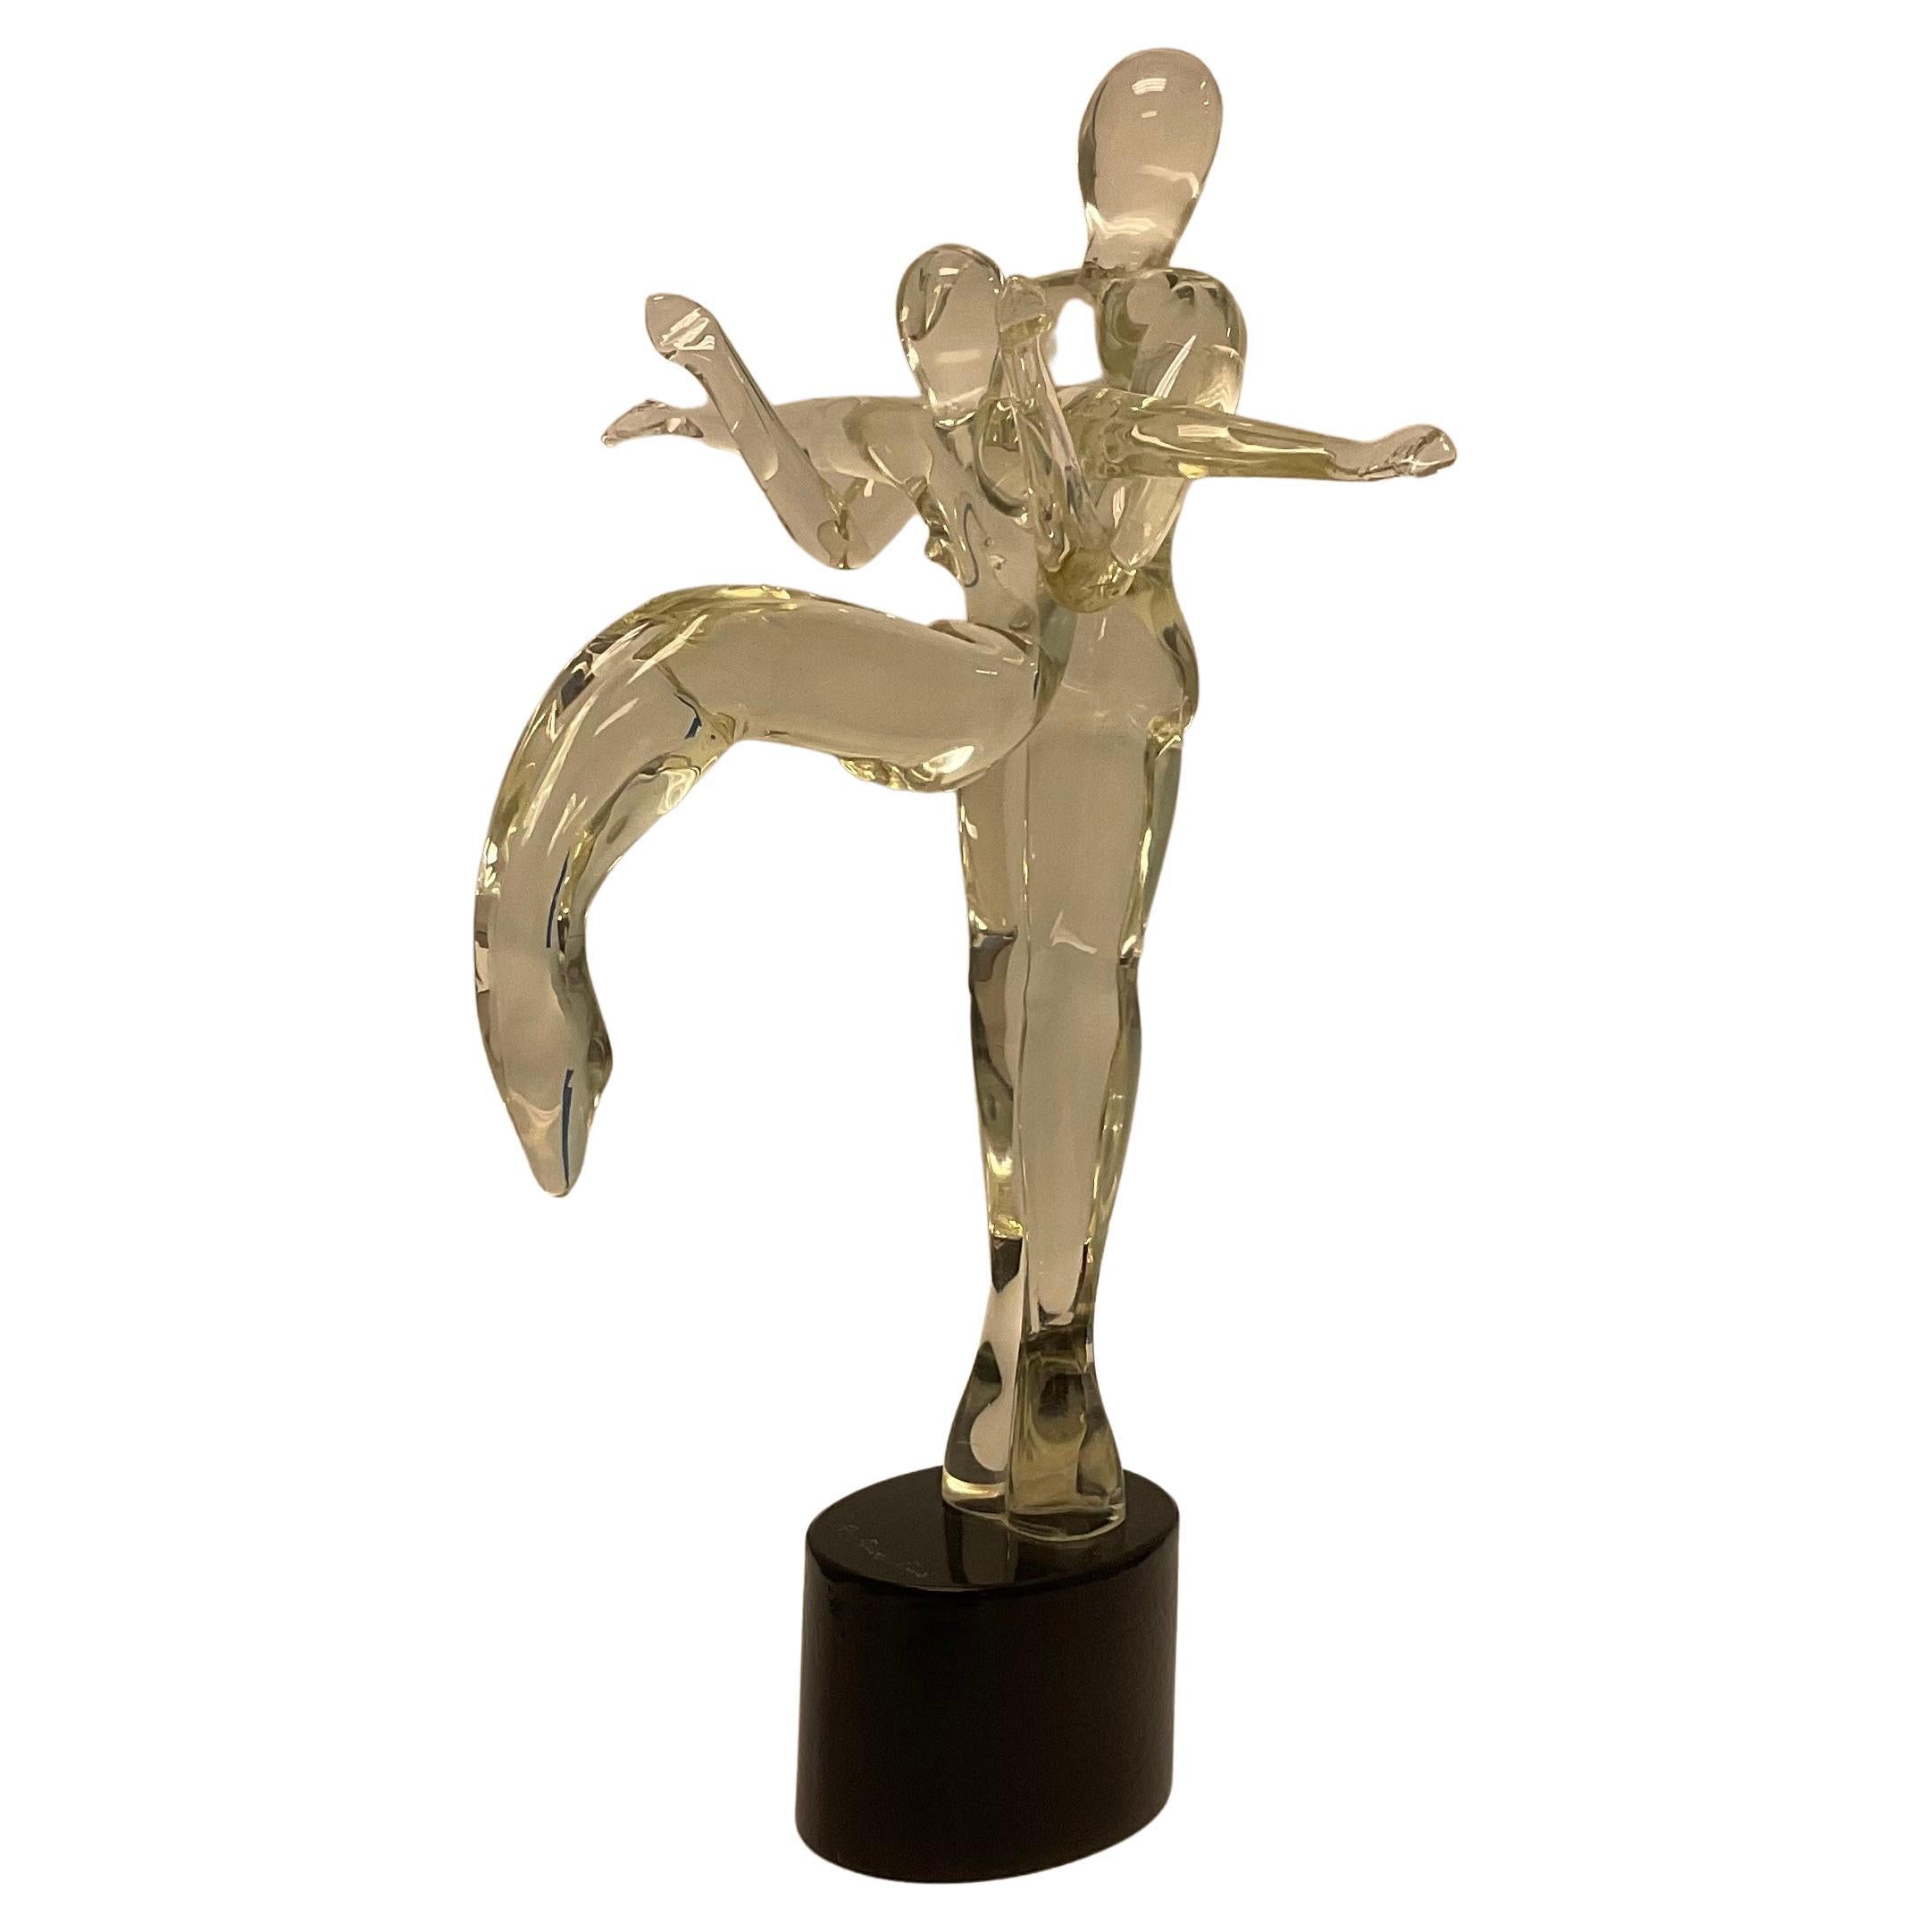 Renato Anatra Gymnast Dancer Sculpture Murano Art Glass Signed by the Artist For Sale